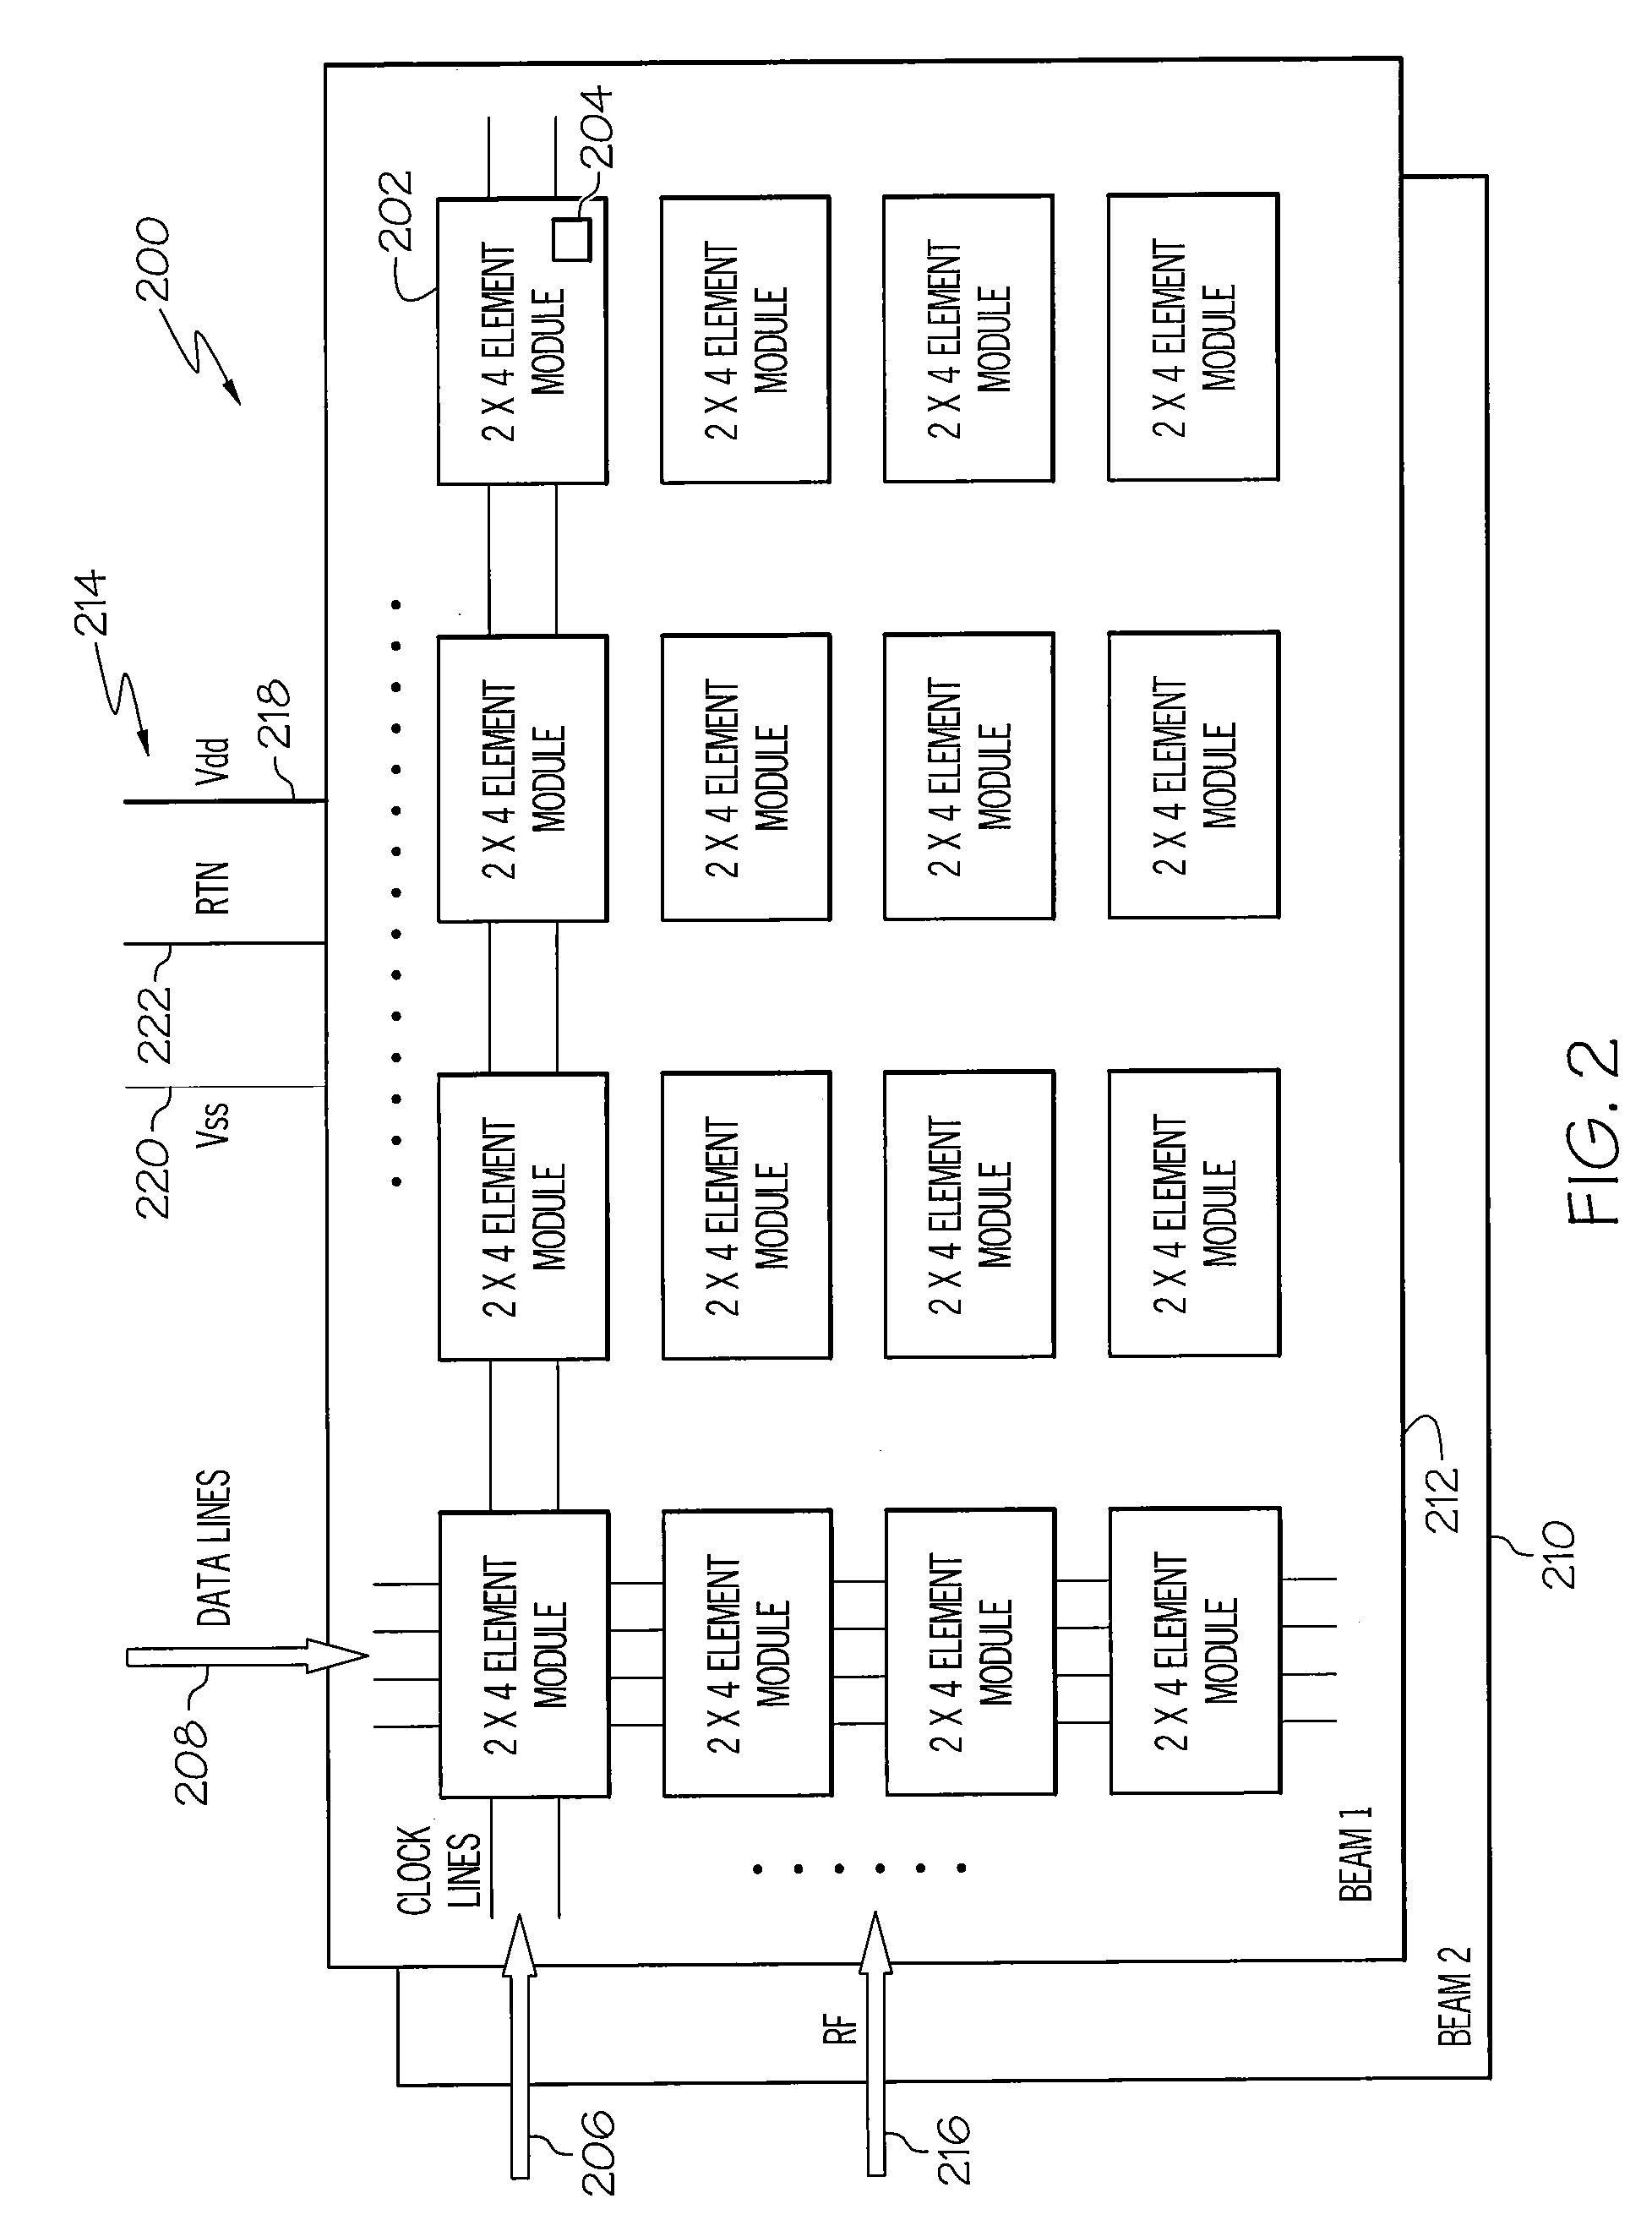 Antenna system including a power management and control system